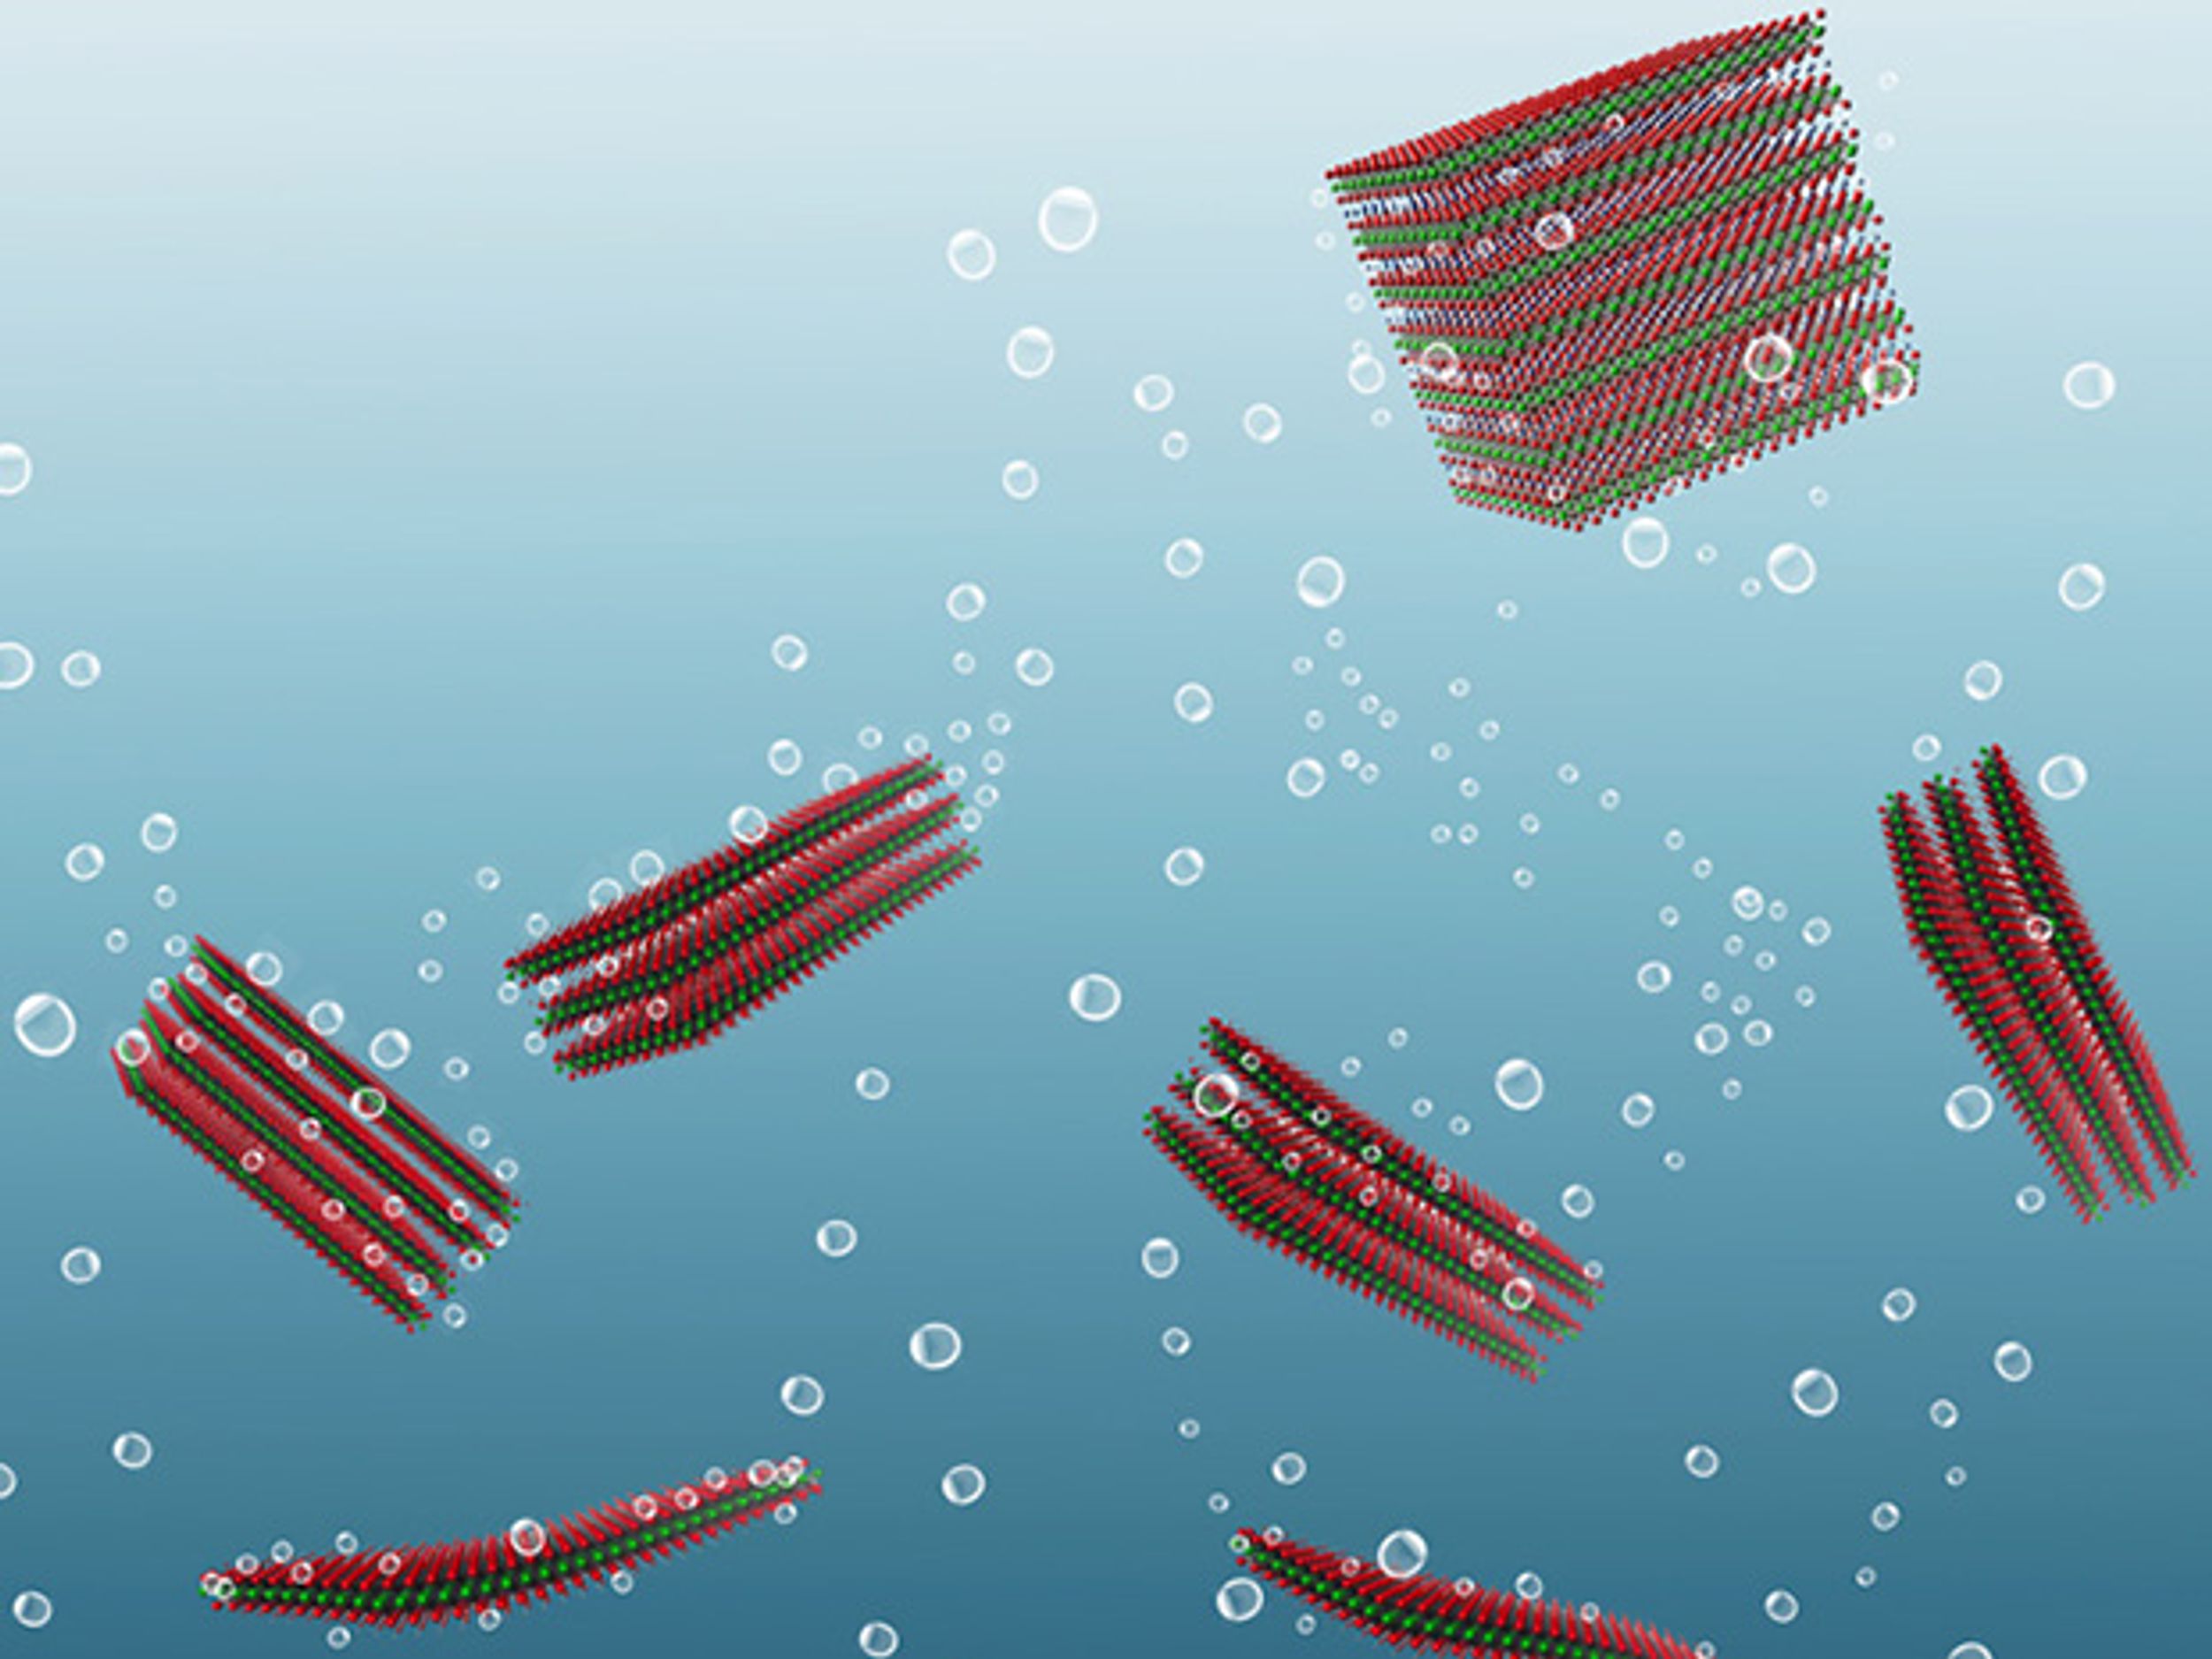 New Method for Layering 2-D Materials Offers Breakthrough in Energy Storage